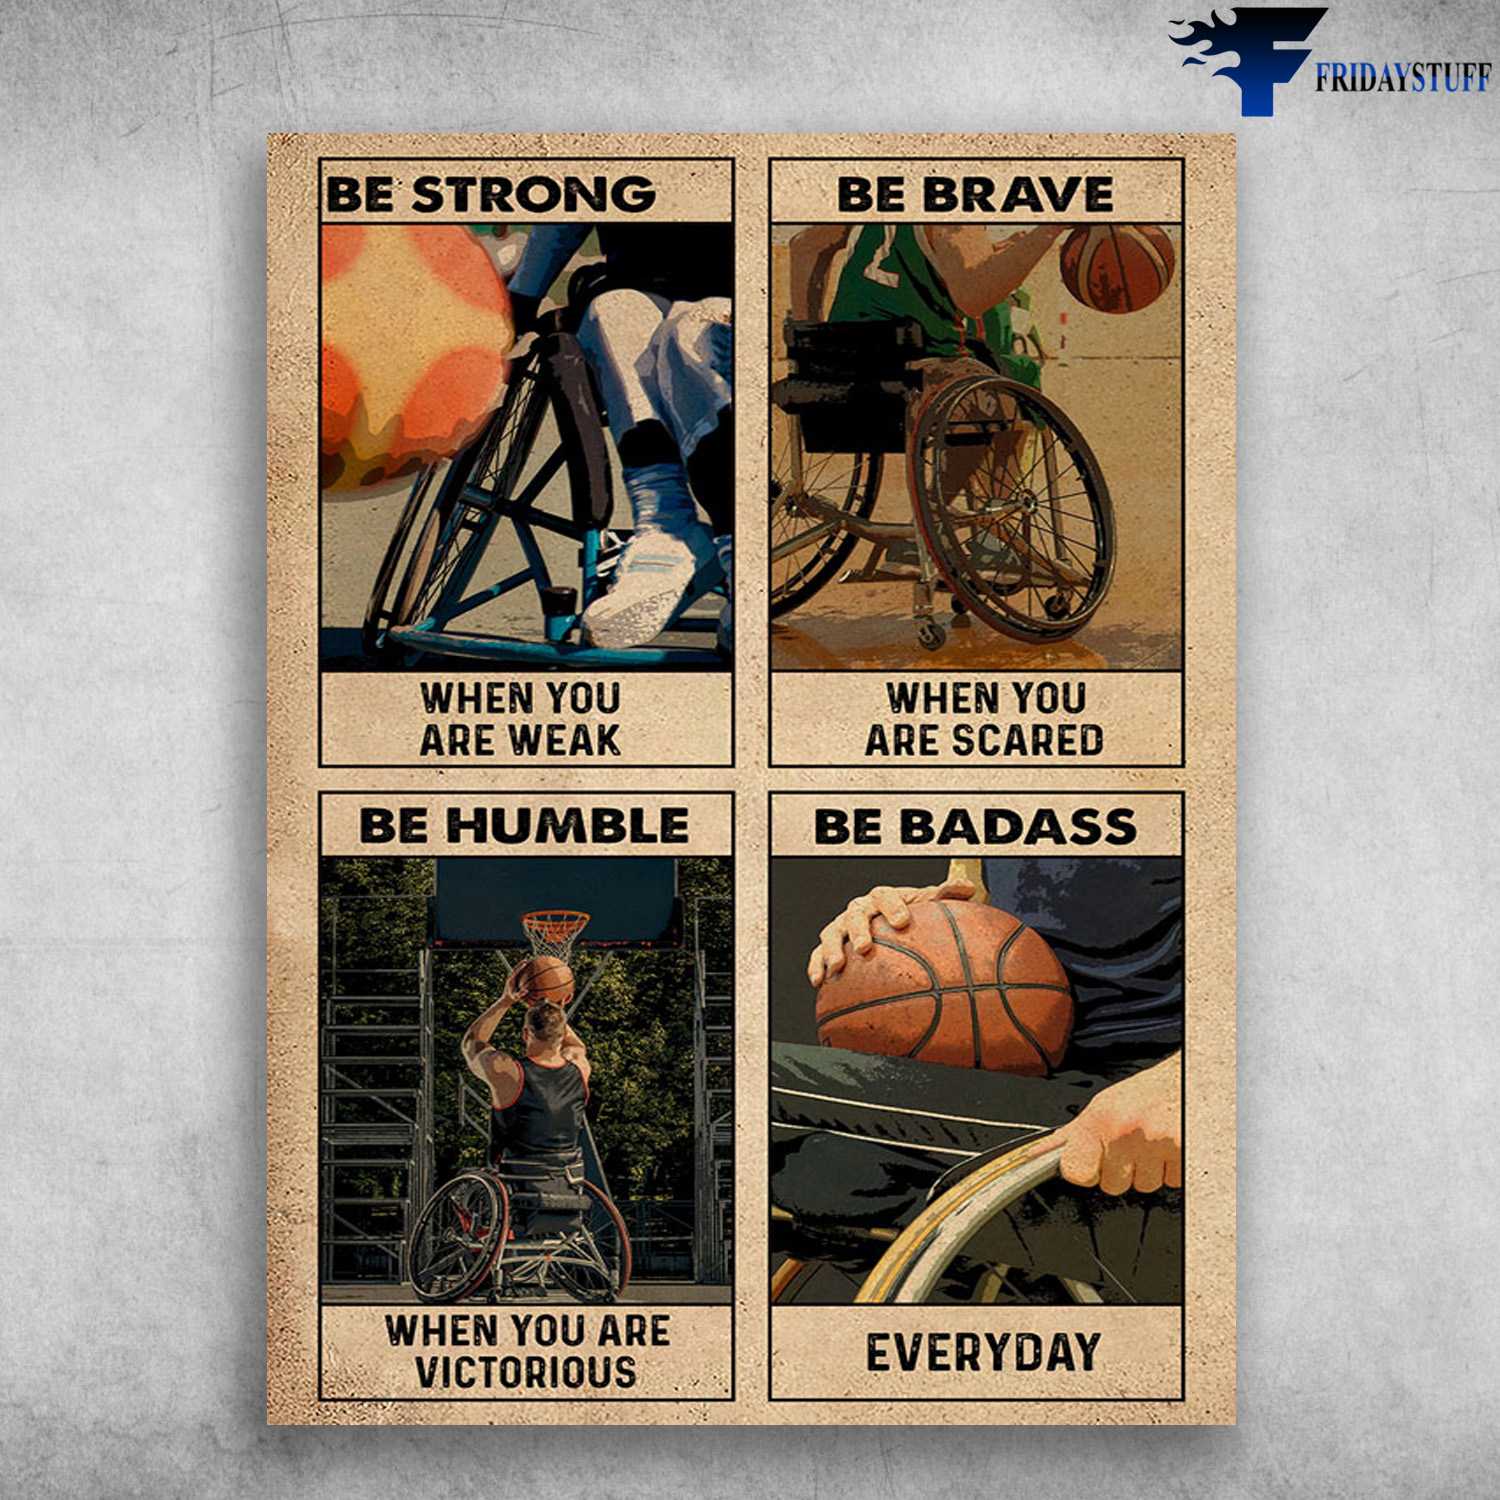 Basketball Lover, Disability Sports - Be Strong When You Are Weak, Be Brave When You Are Scared, Be Humble When You Are Victorious, Be Badass Everyday